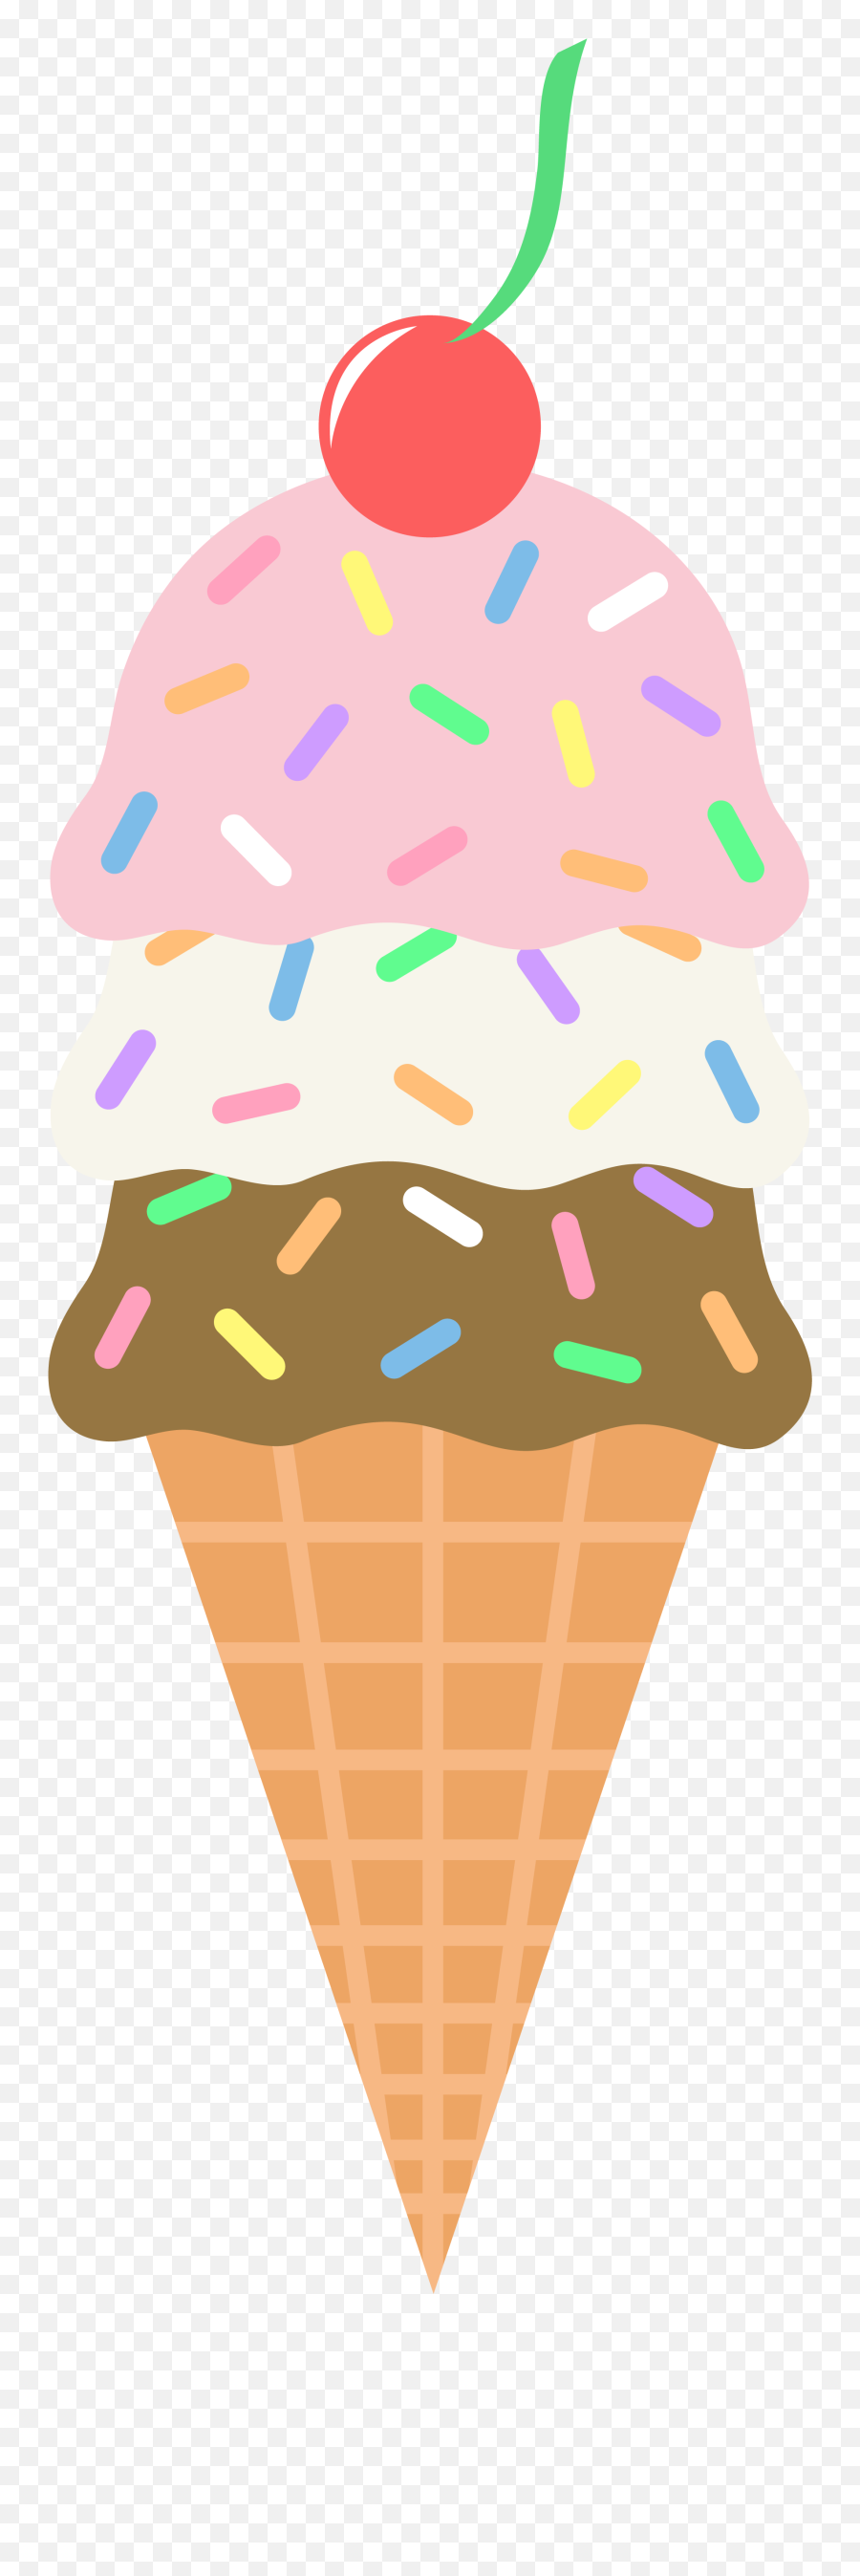 Free Pictures Of An Ice Cream Cone - Clip Art Ice Cream Cone Emoji,Ice Cream Sun Cloud Emoji